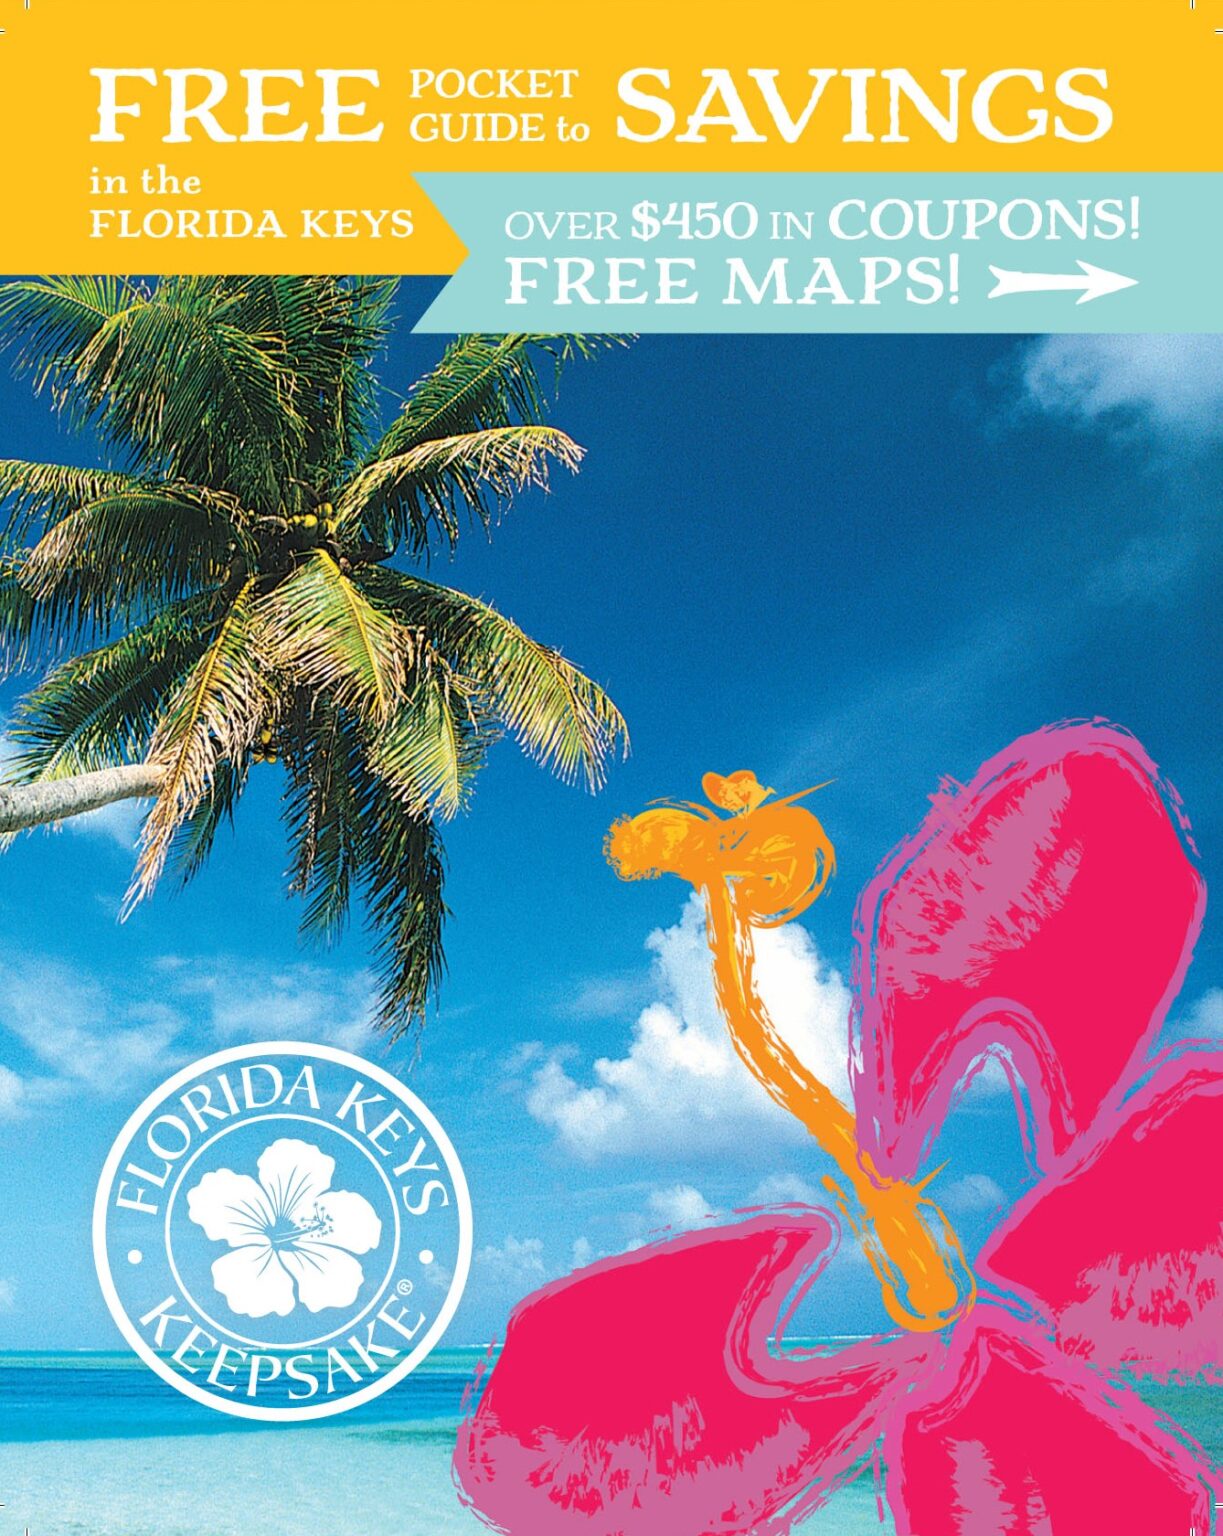 Key West and The Florida Keys Free Discount Coupons and Informational